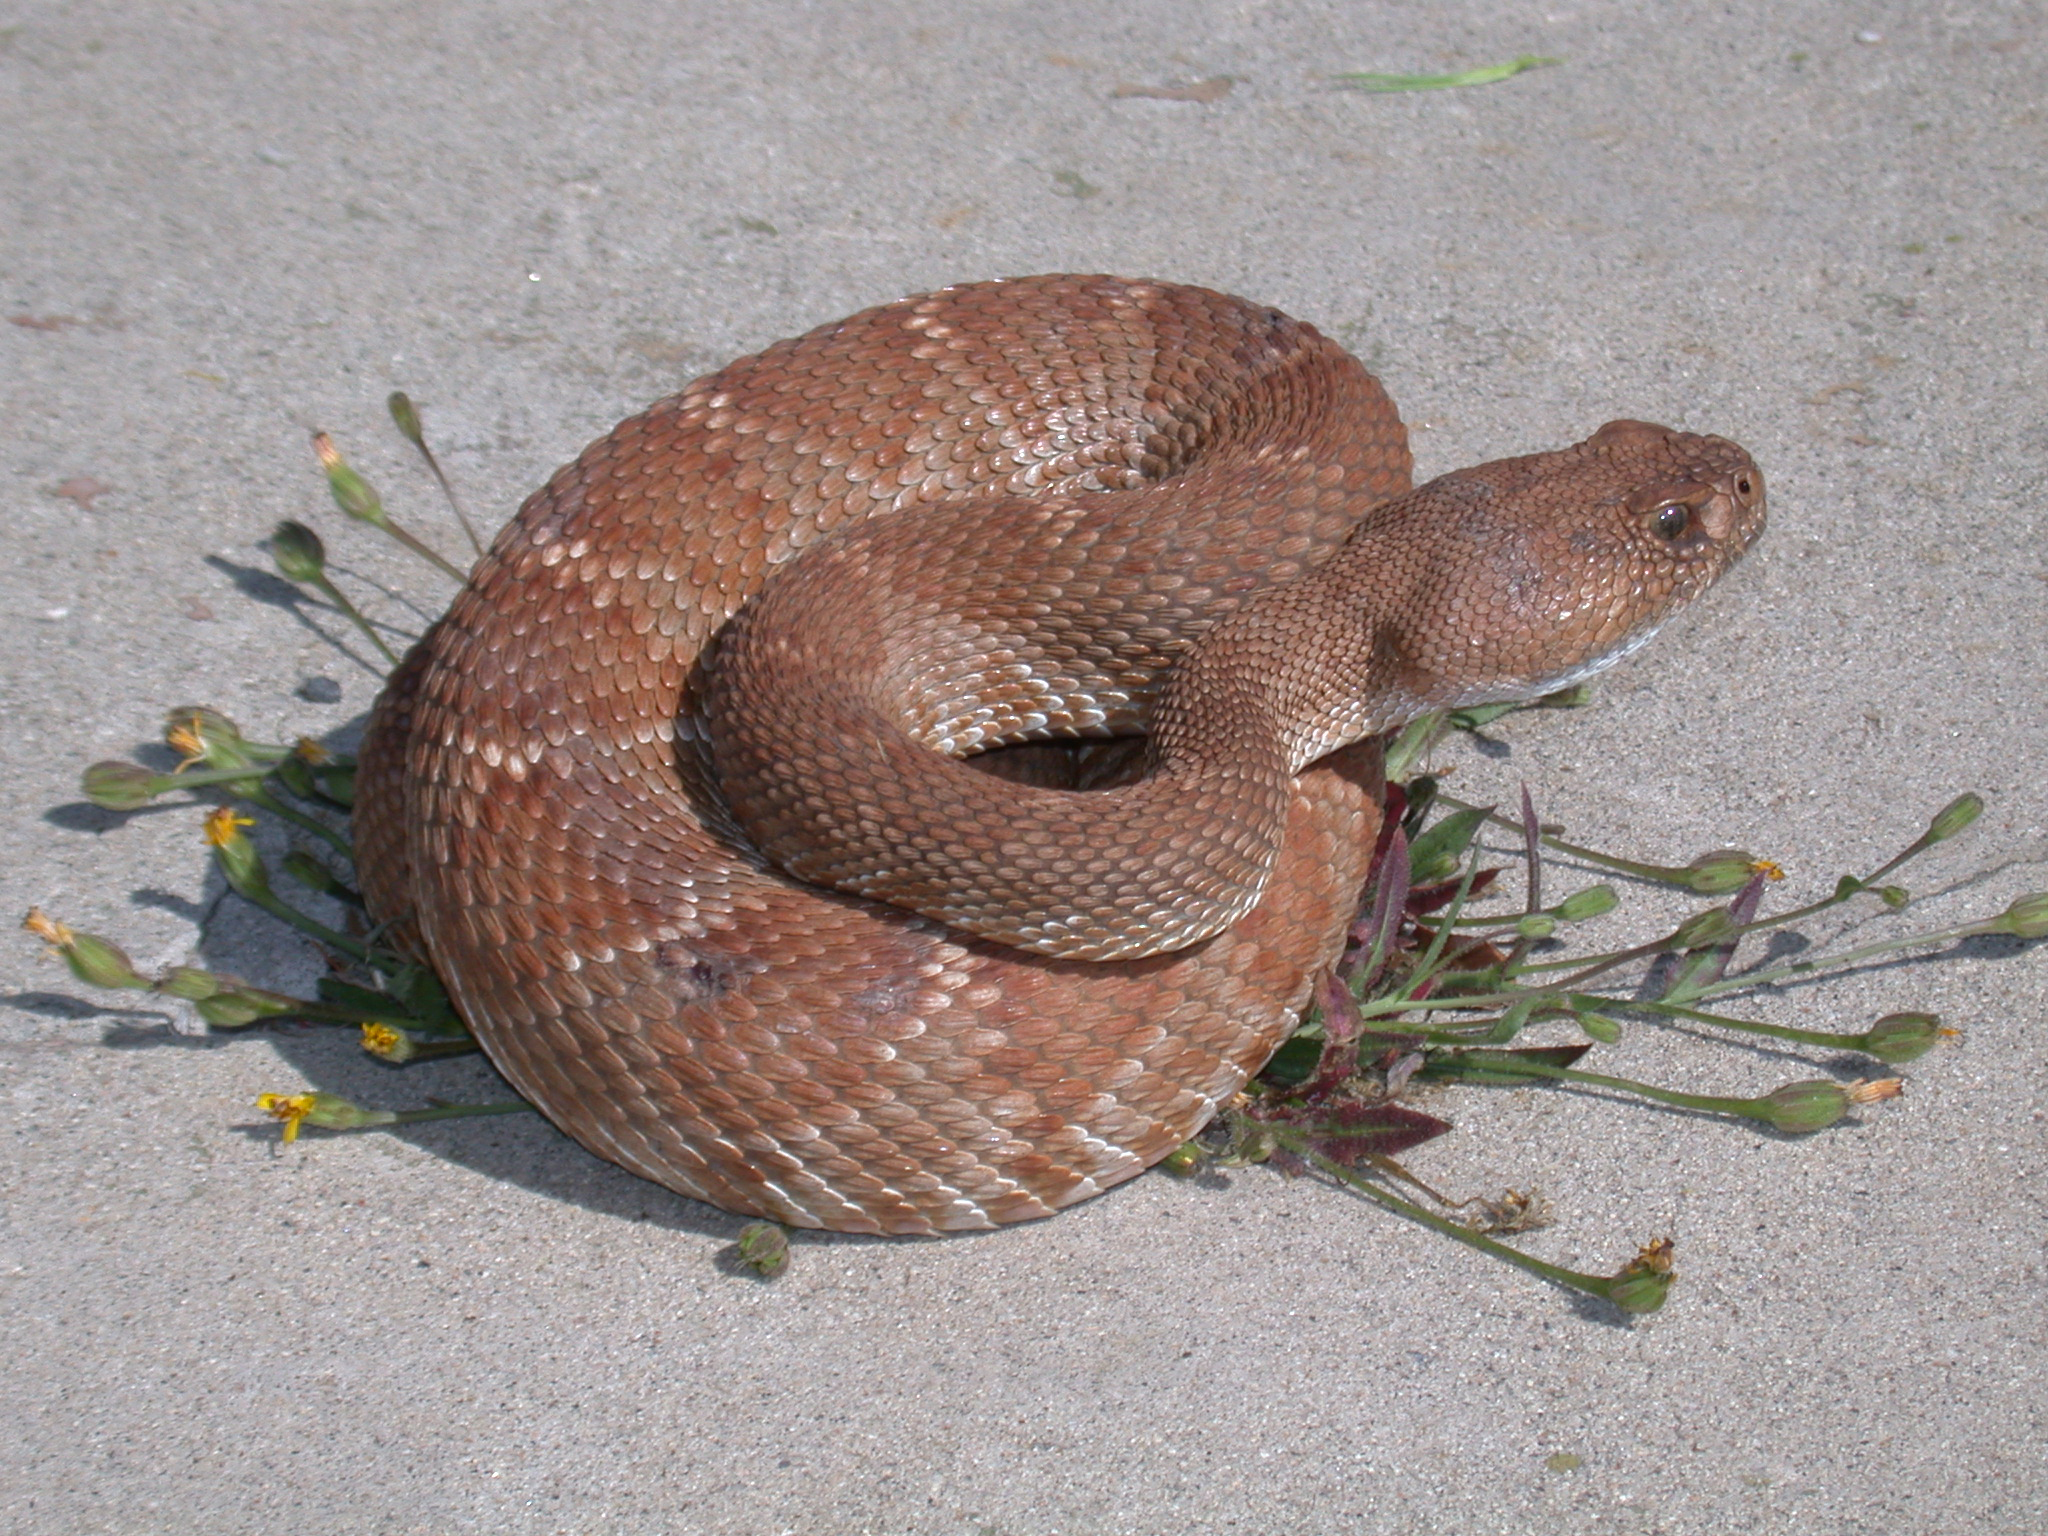 RATTLER - identifying characteristics include a series of dark and light bands near the tail, just before the rattles which are different from the markings on the rest of the body. NOTE that 'rattles' can break off and are not always present. 